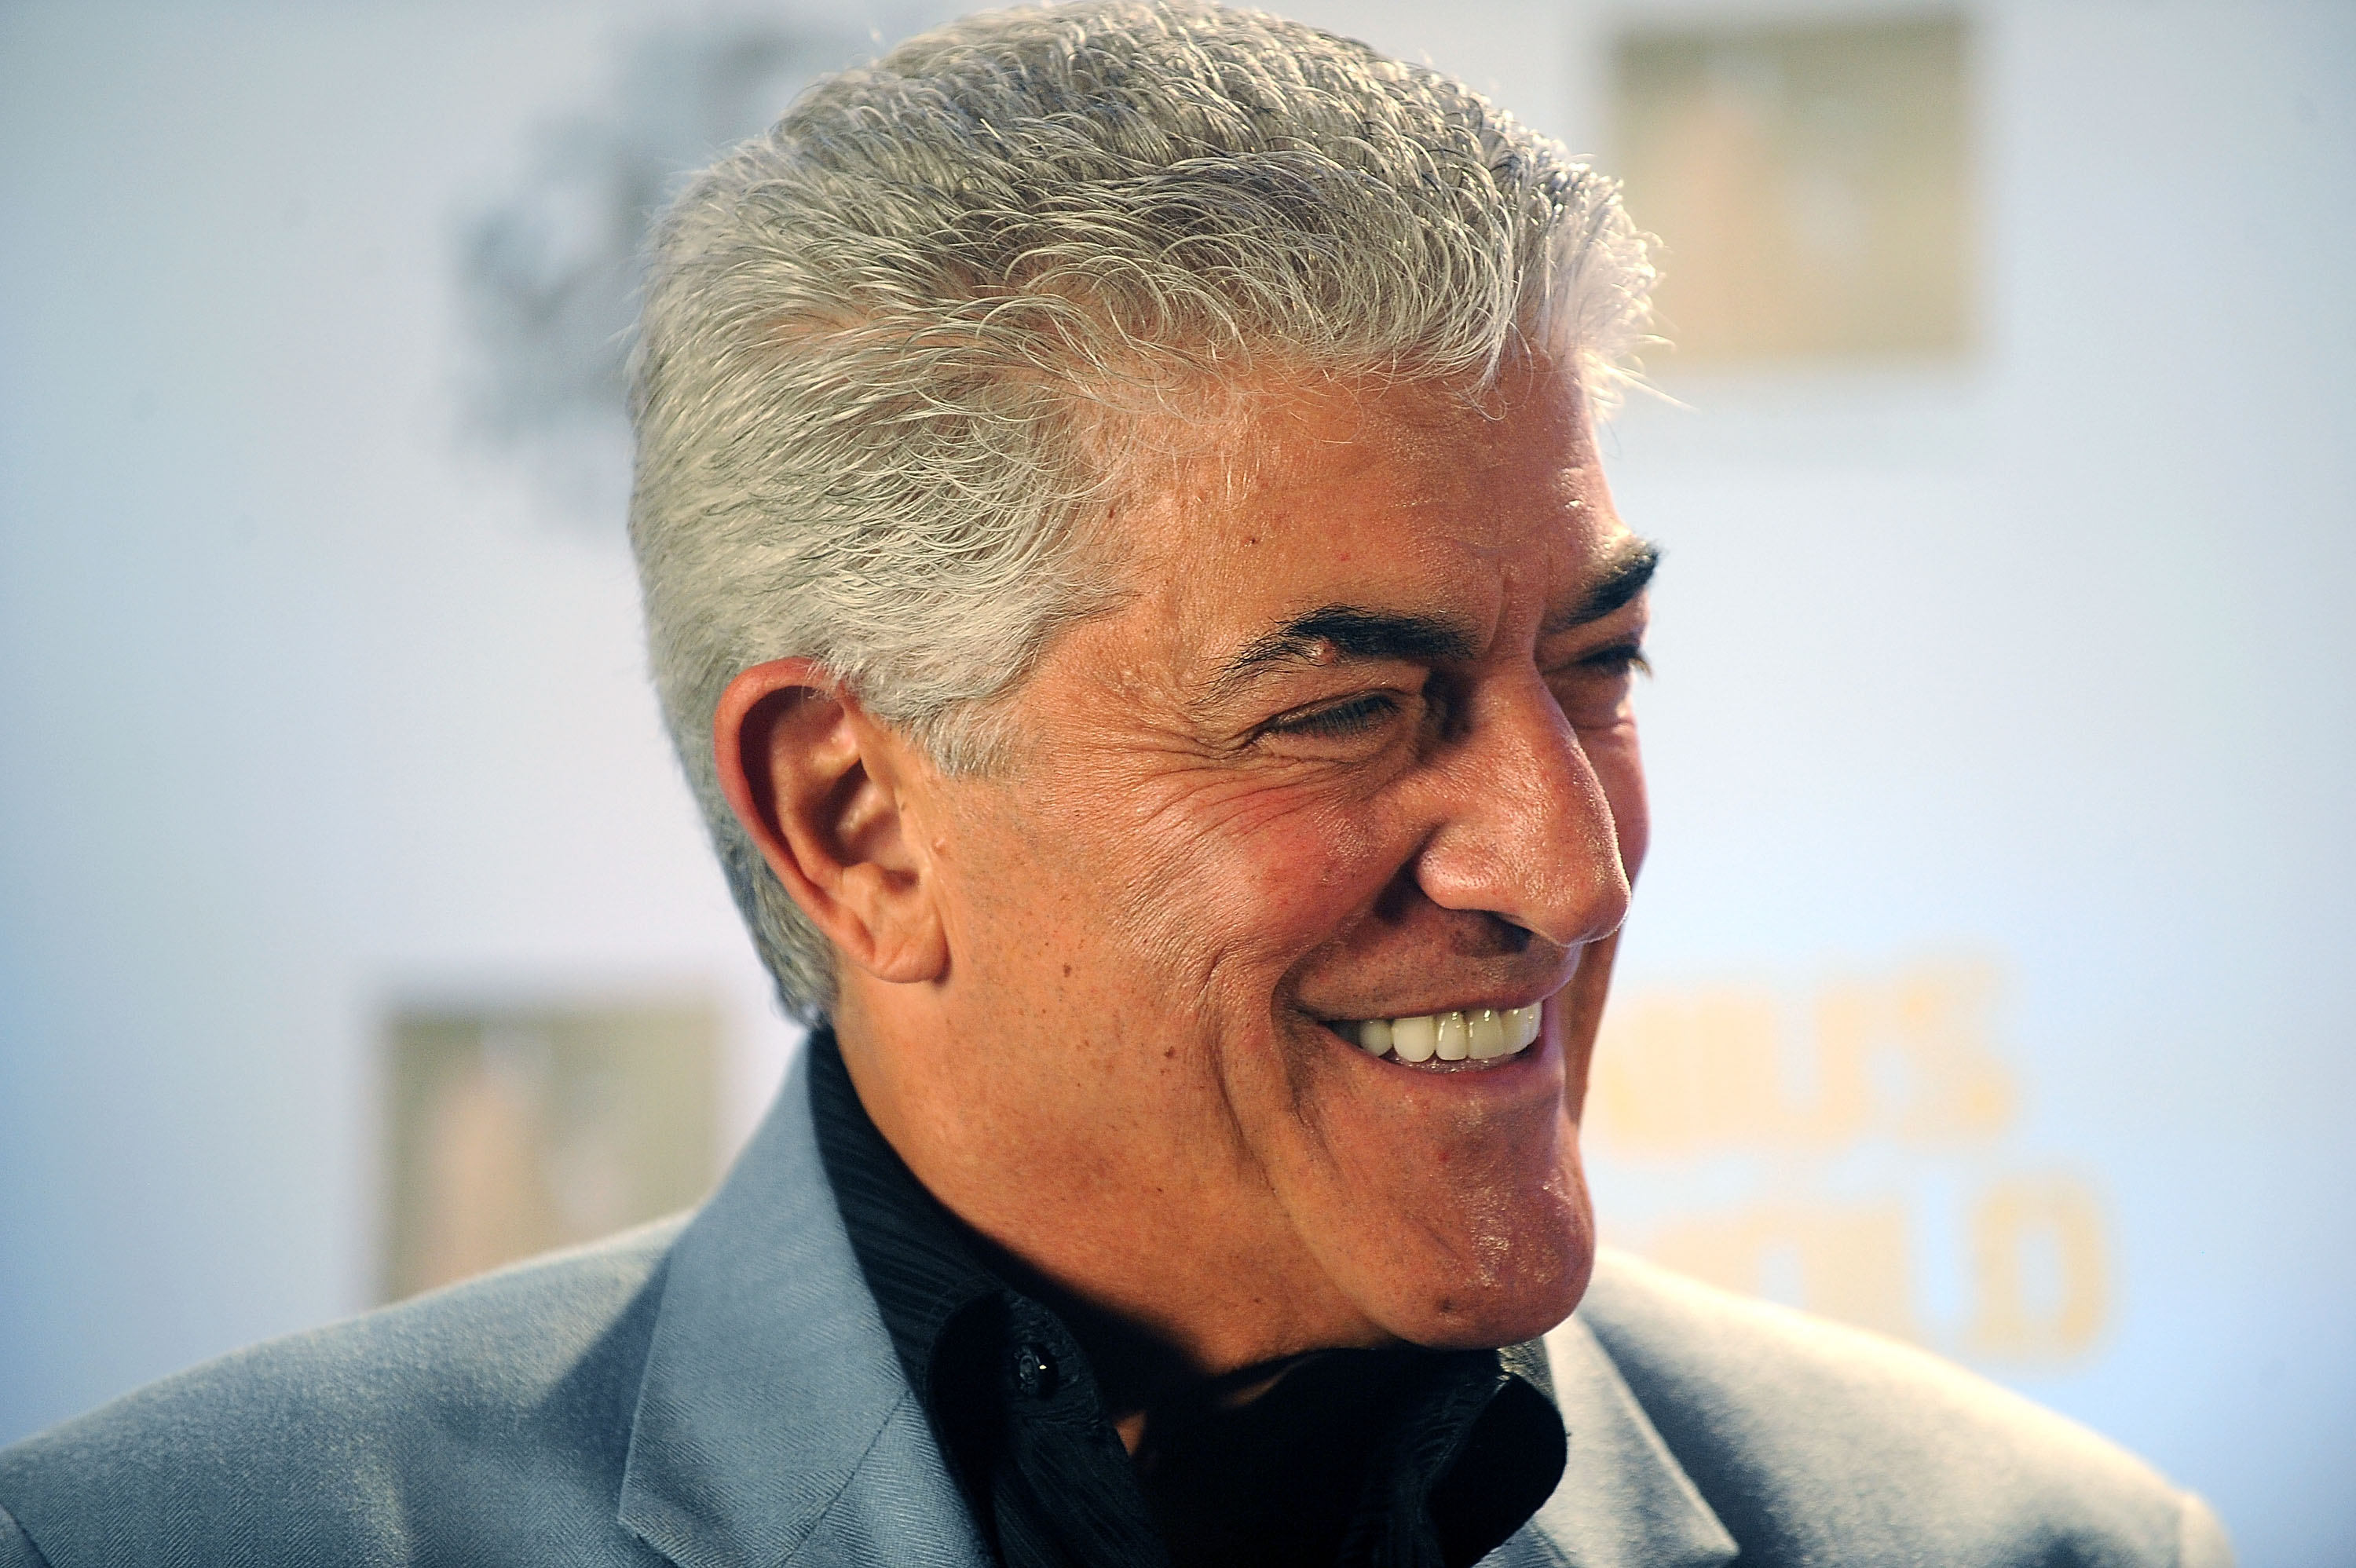 Actor Frank Vincent attends the Genius On Hold premiere at Cinema Paradiso on January 8, 2011 in Fort Lauderdale, Florida. (Gustavo Caballero—Getty)